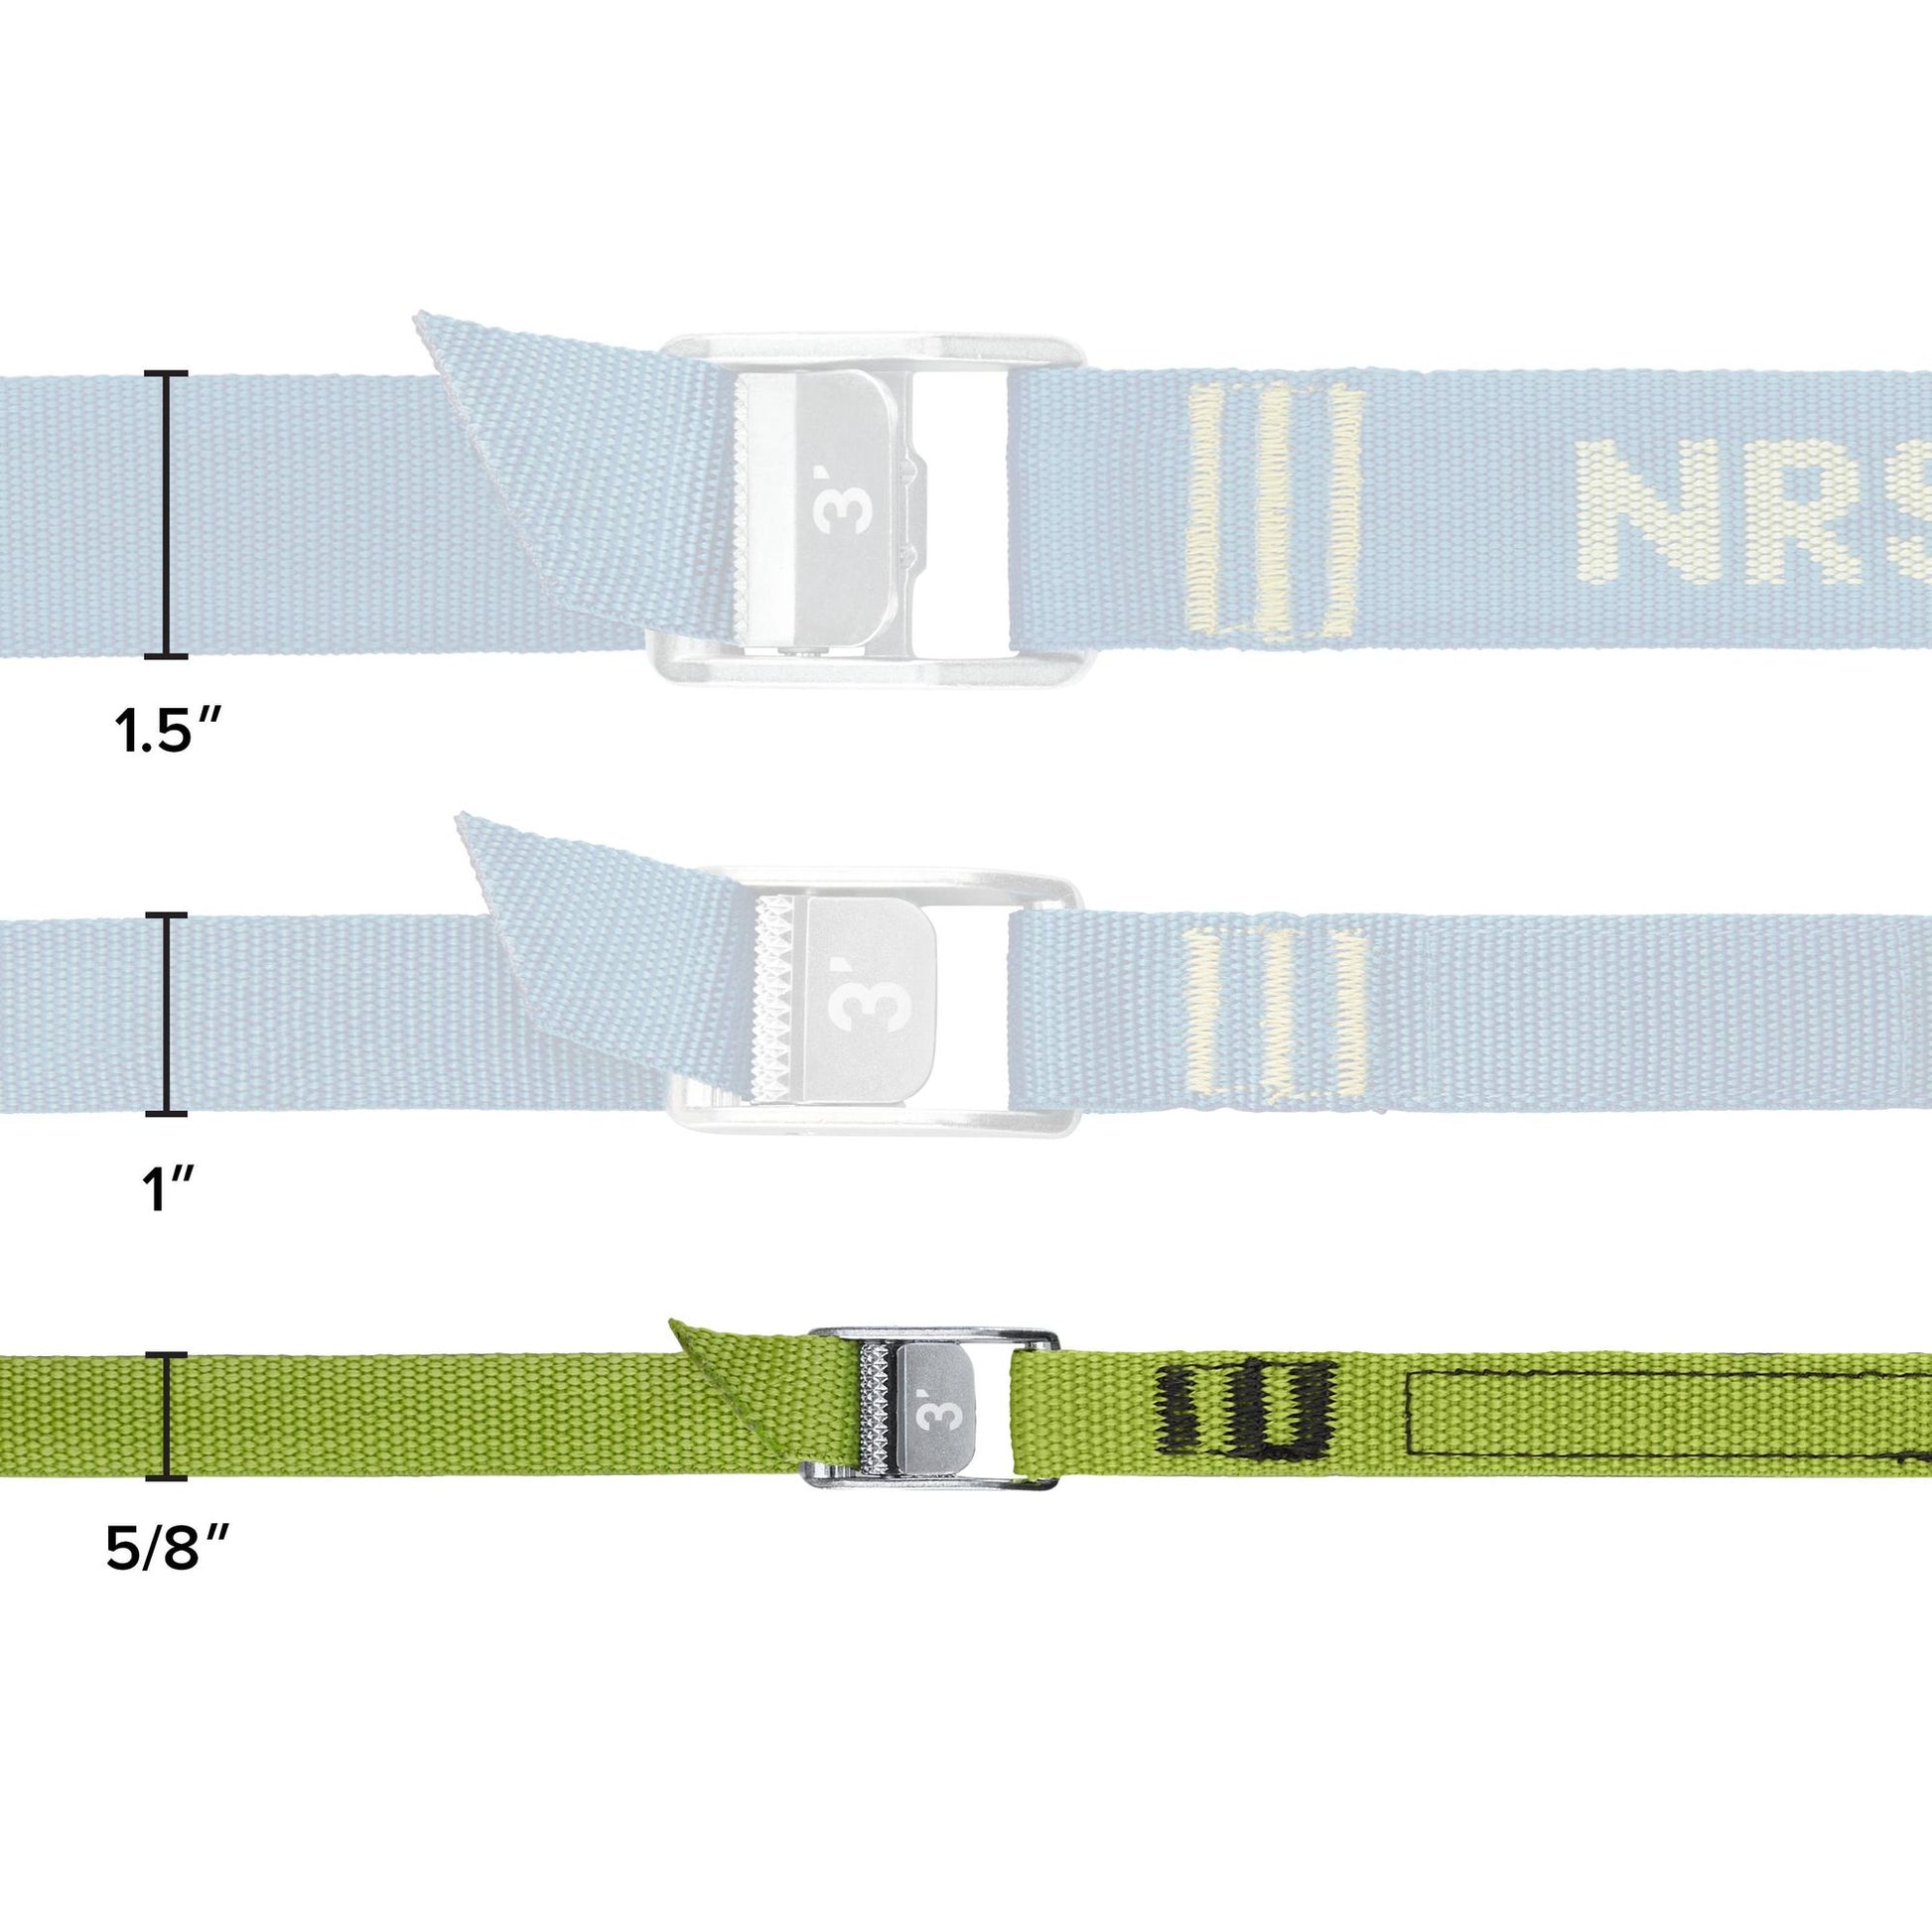 The NRS Micro Straps 5/8" is made of UV-protected polypropylene webbing and provides secure fastening for all your gear.